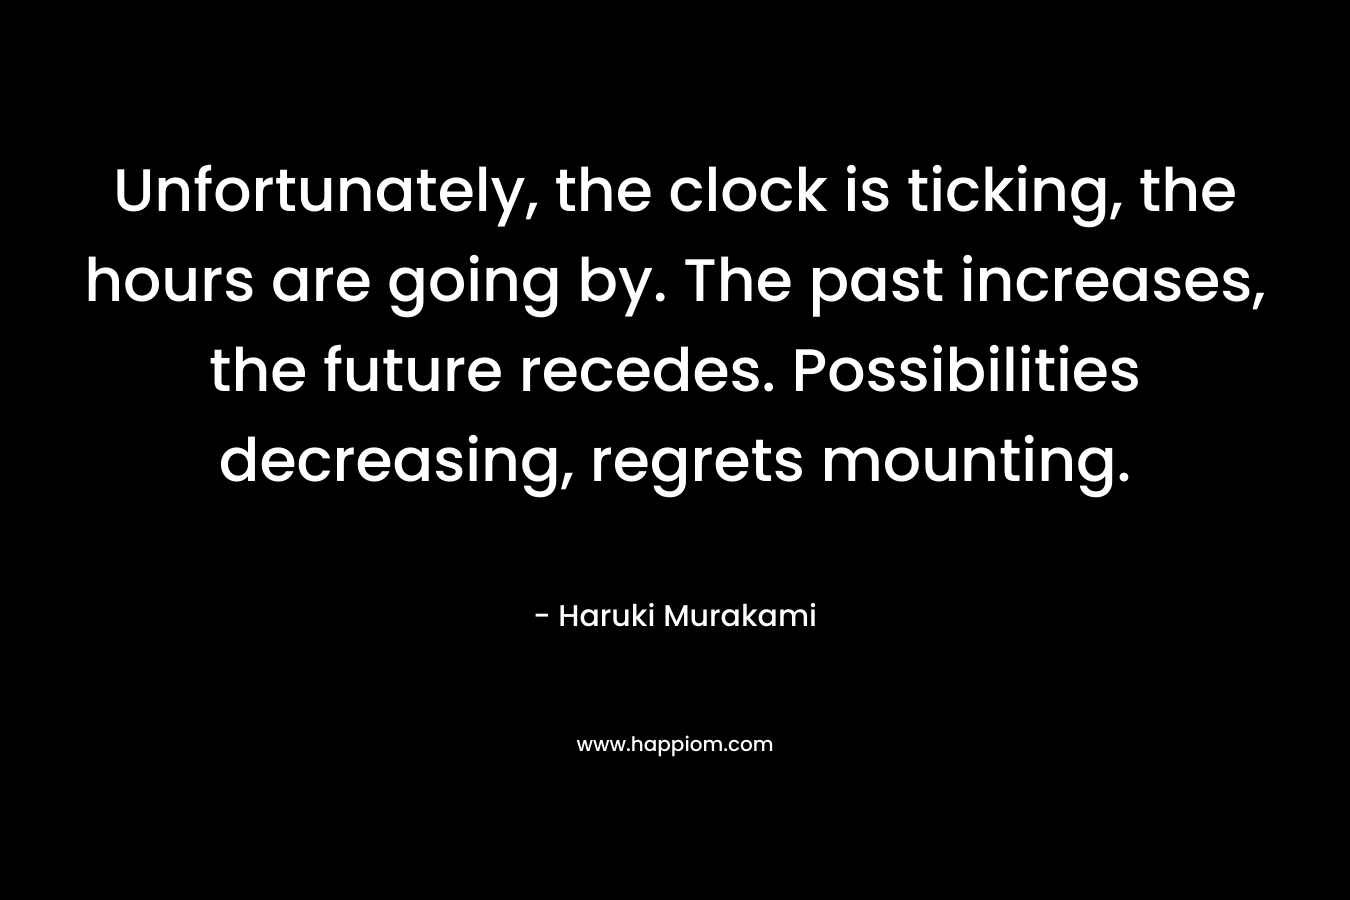 Unfortunately, the clock is ticking, the hours are going by. The past increases, the future recedes. Possibilities decreasing, regrets mounting.